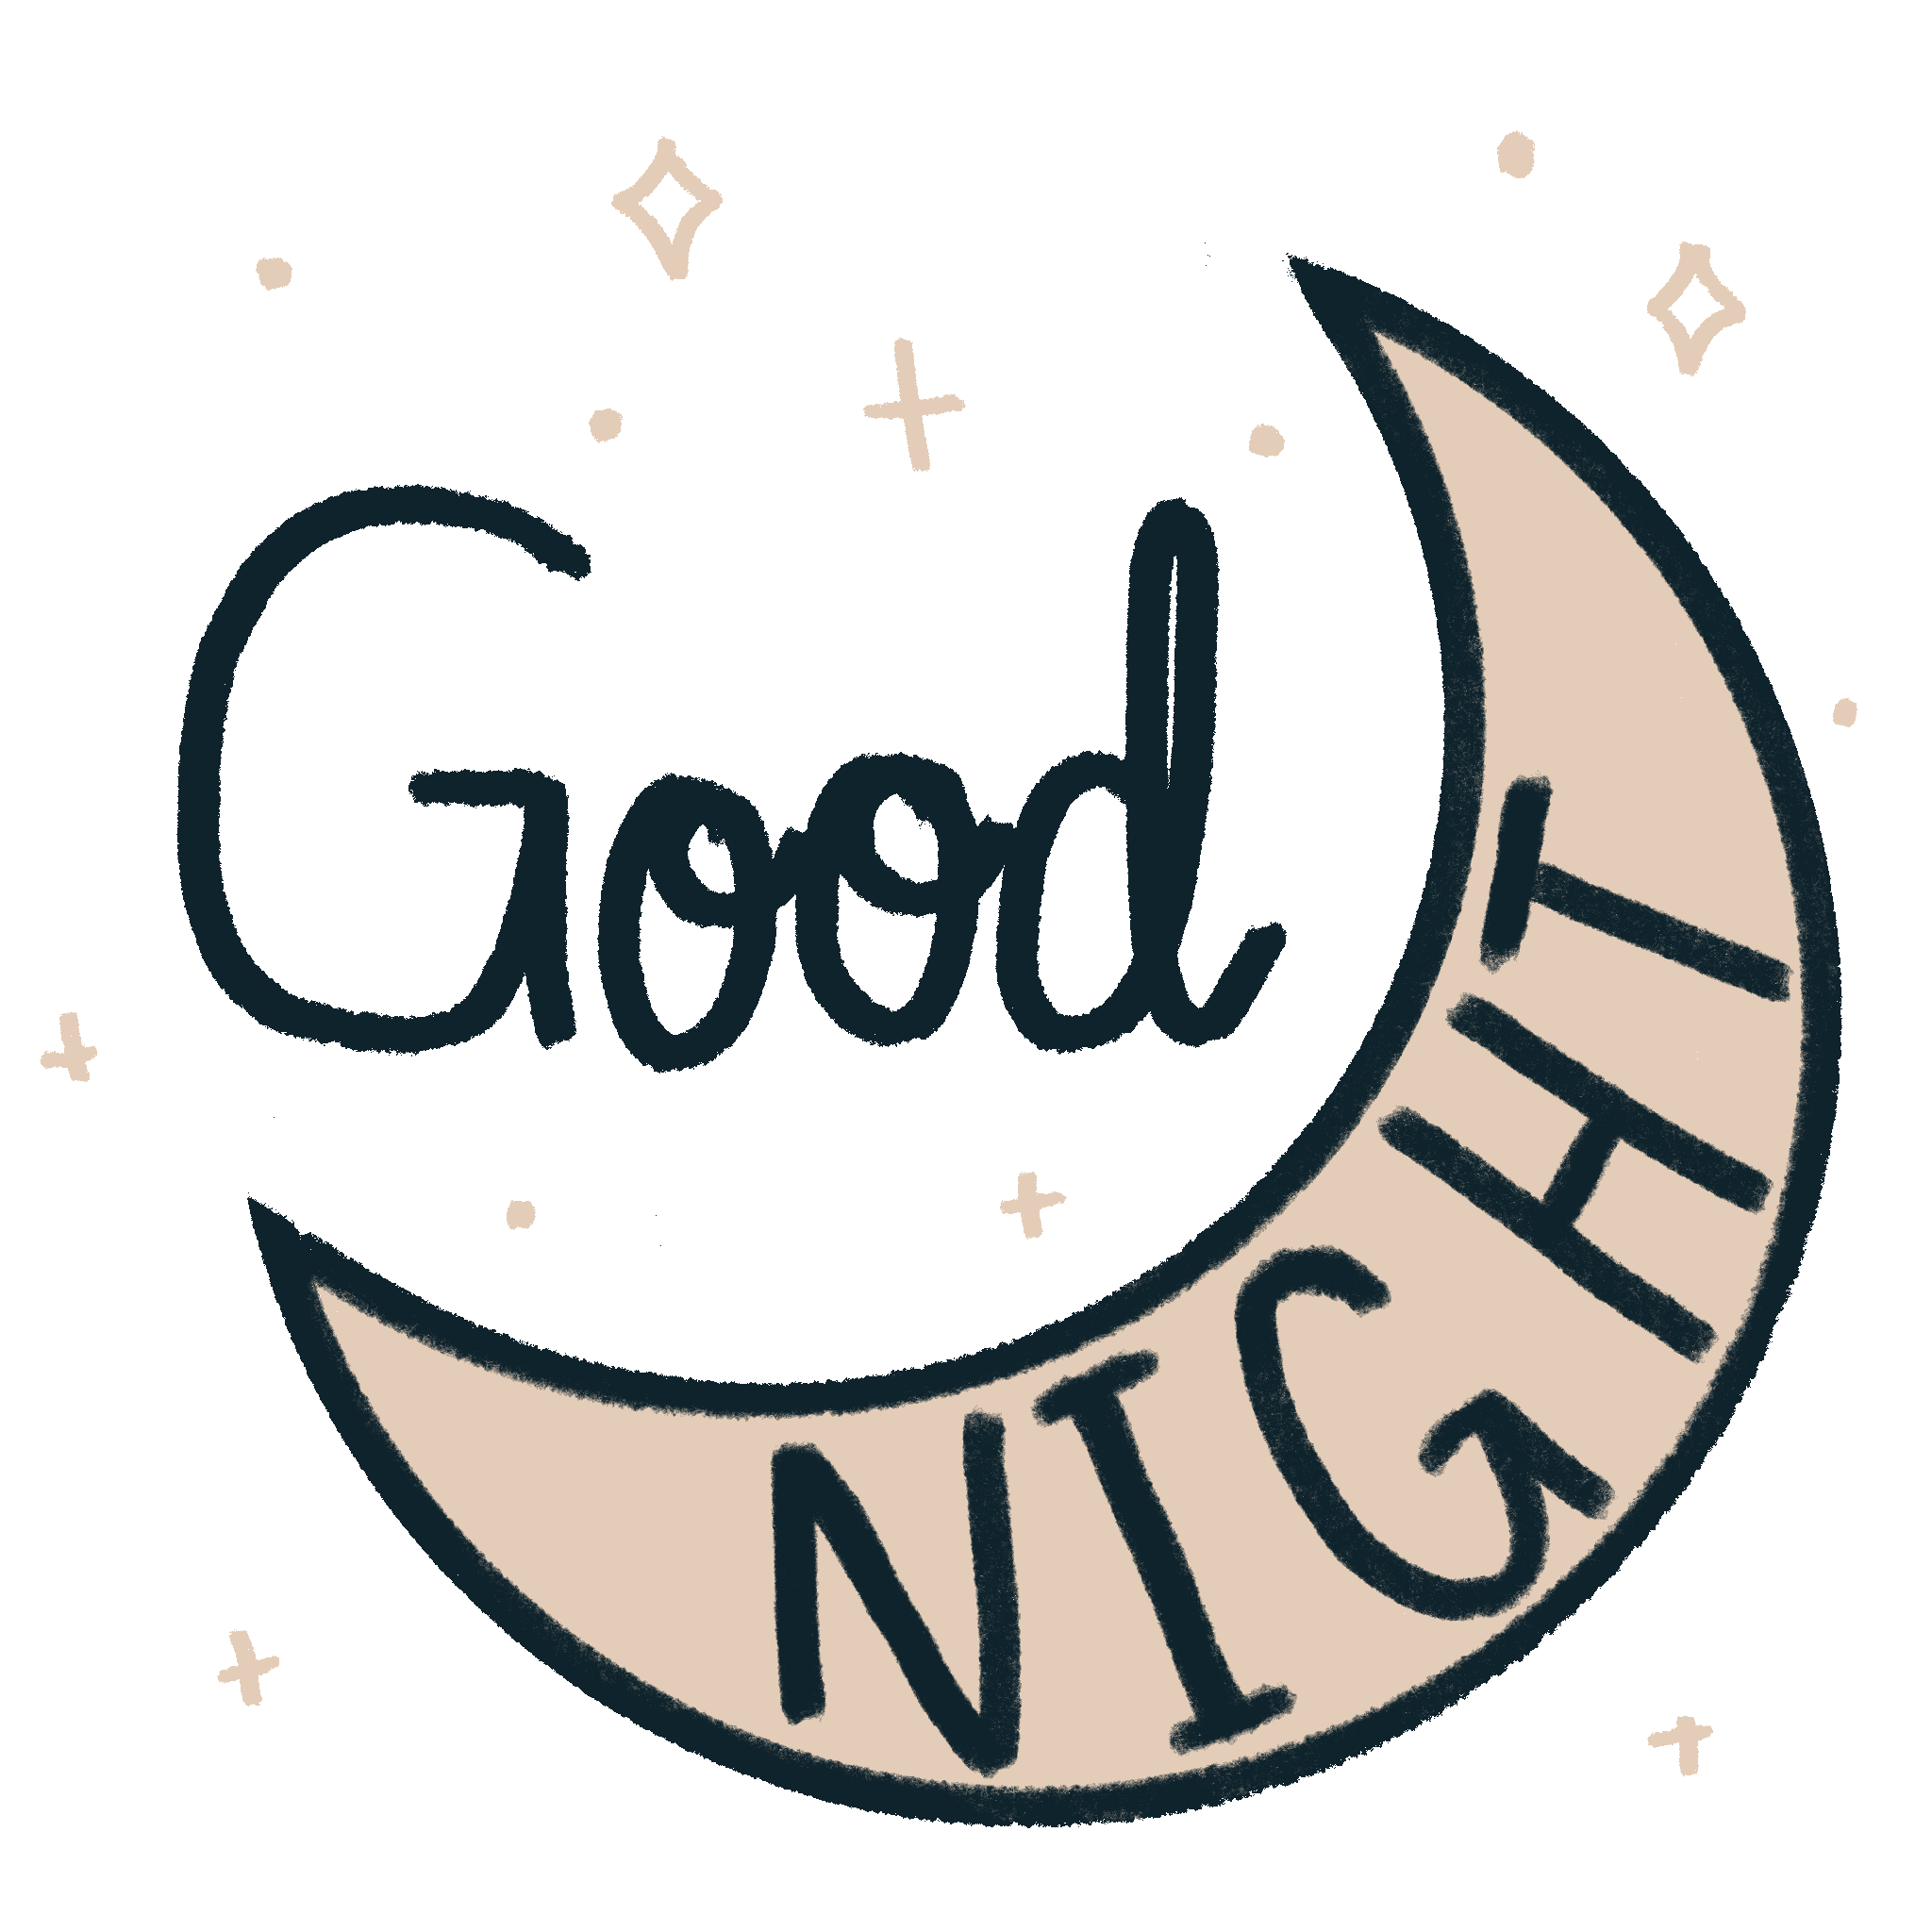 Sleepy Good Night Sticker by Lost Lily for iOS & Android | GIPHY